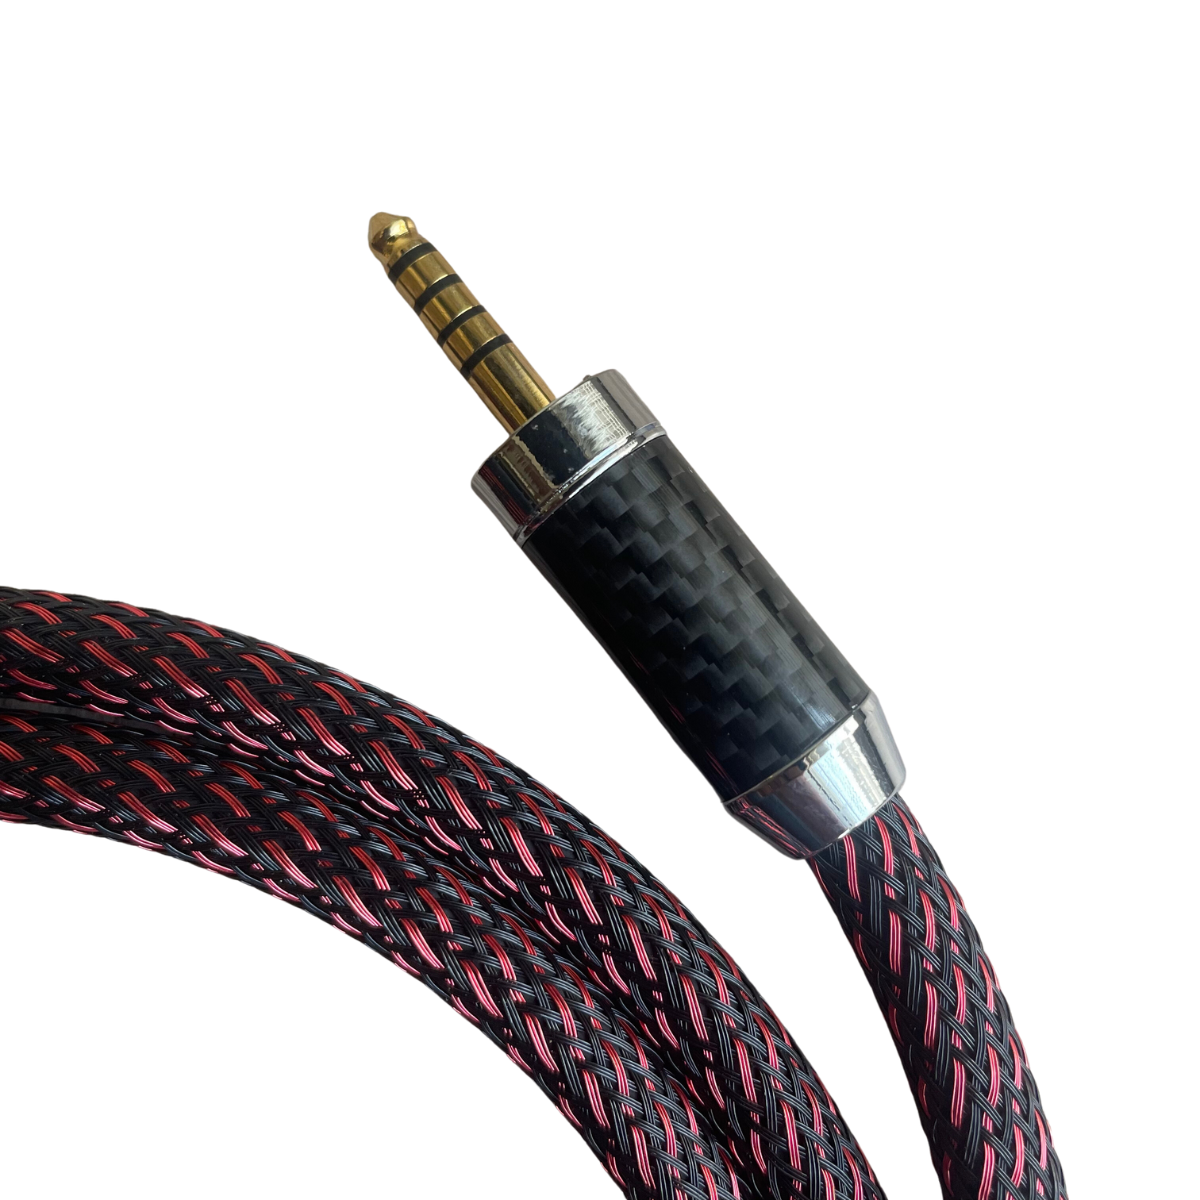 EarAudio Premium Dual RCA To 4.4mm Male Interconnects Cable